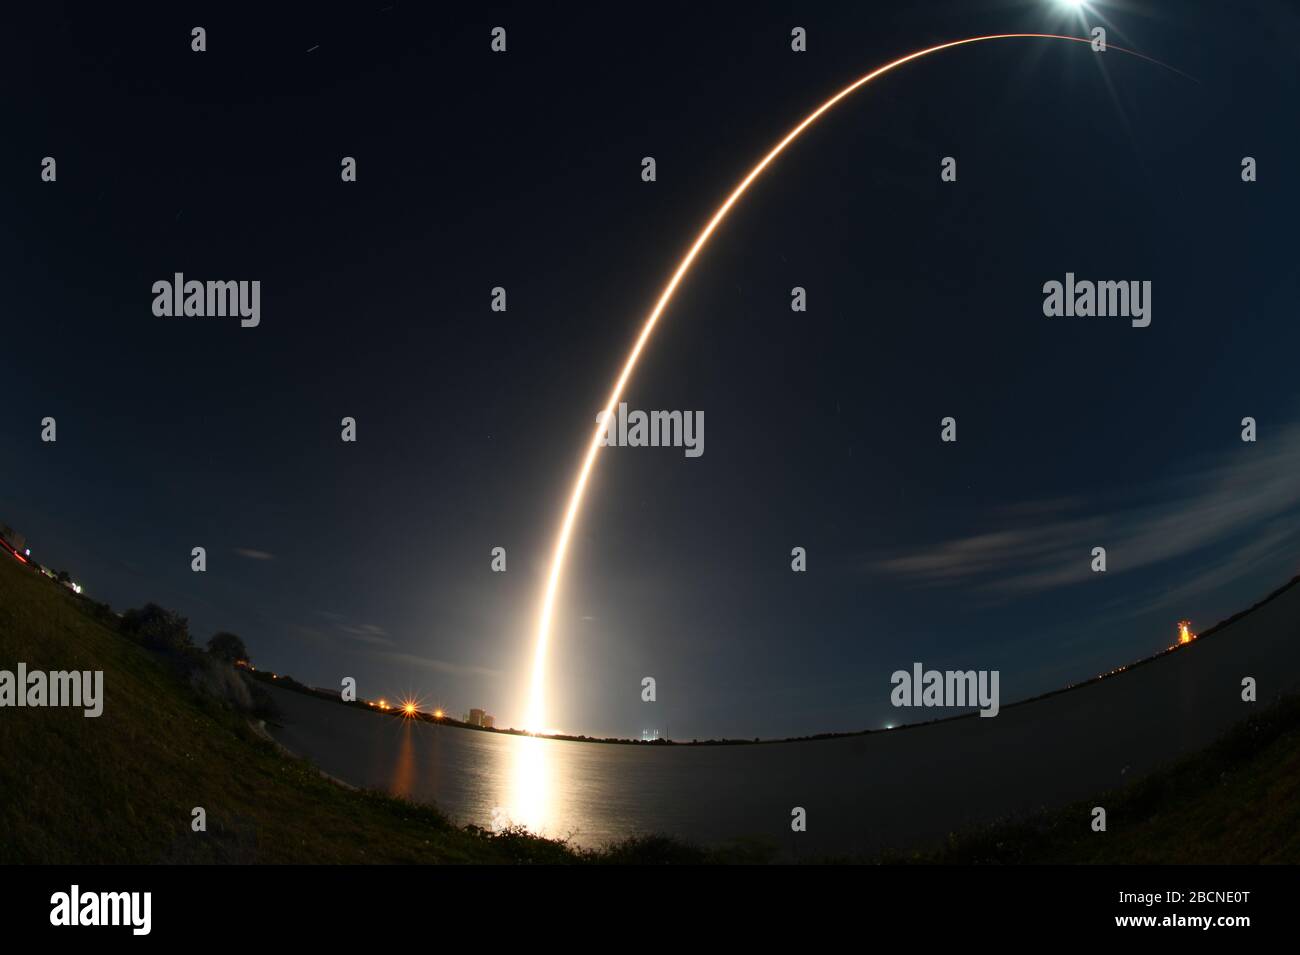 United Launch Alliance's Atlas V rocket carries the Solar Orbiter into space as it launches on Feb. 9, 2020, at Cape Canaveral Air Force Station, Fla. The Solar Orbiter is a Sun-observing satellite which is intended to perform measurements of the inner heliosphere and perform close observations of the polar regions of the Sun. (U.S. Air Force photo by Senior Airman Dalton Williams) Stock Photo